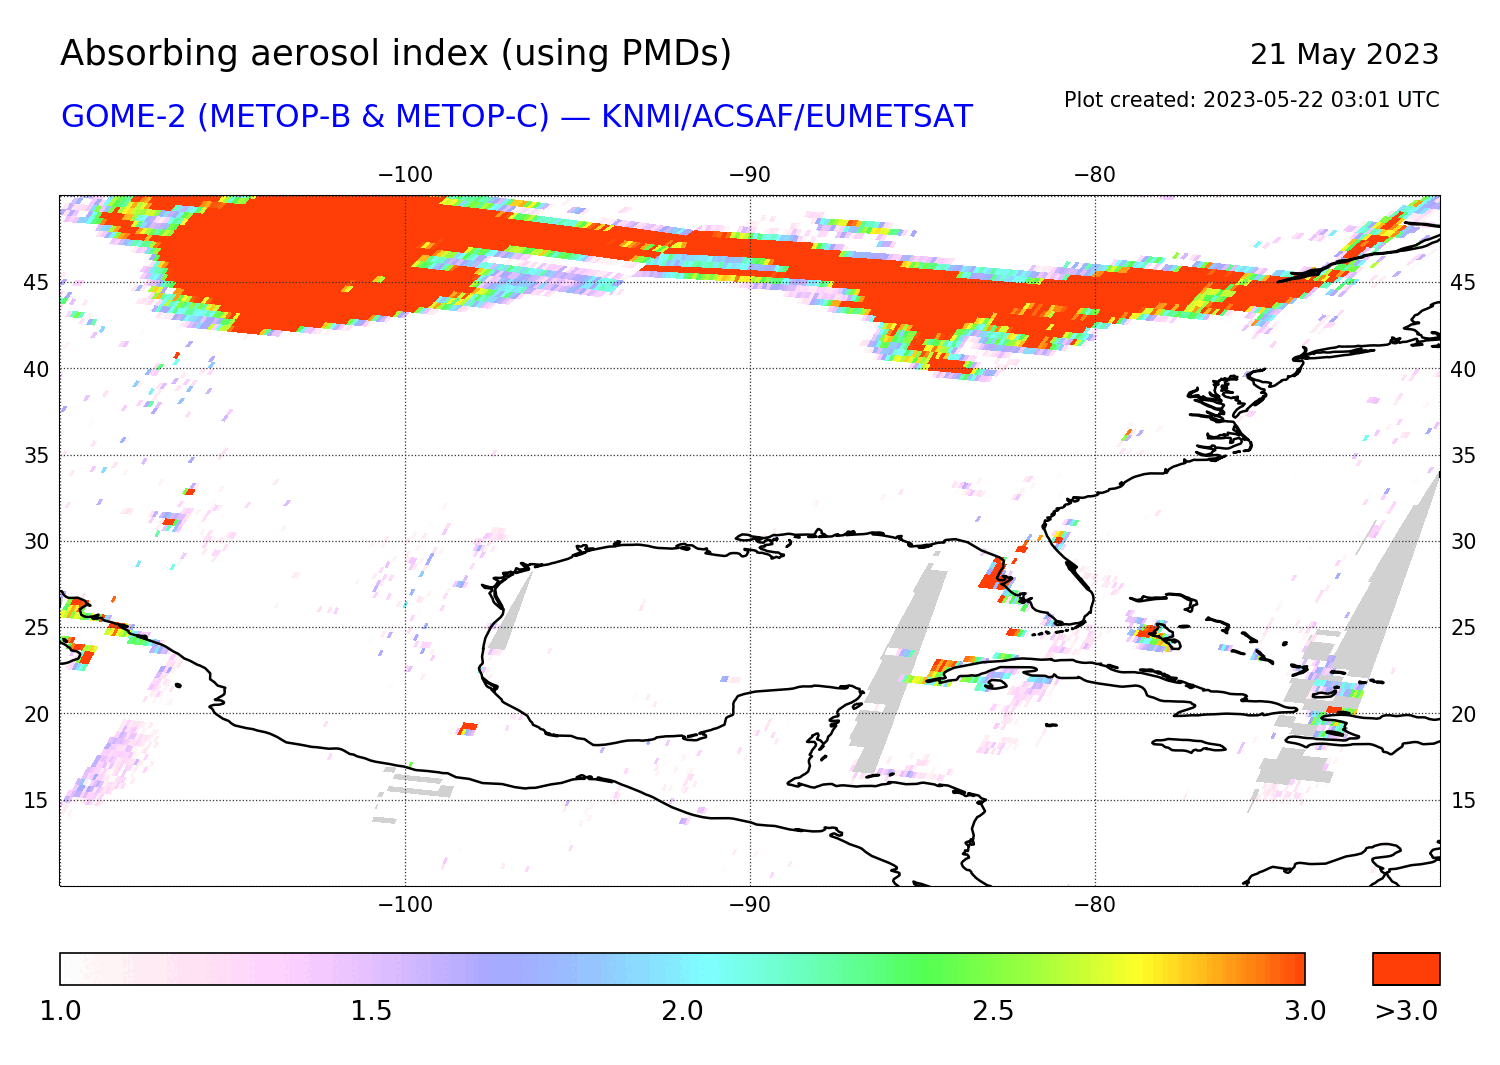 GOME-2 - Absorbing aerosol index of 21 May 2023